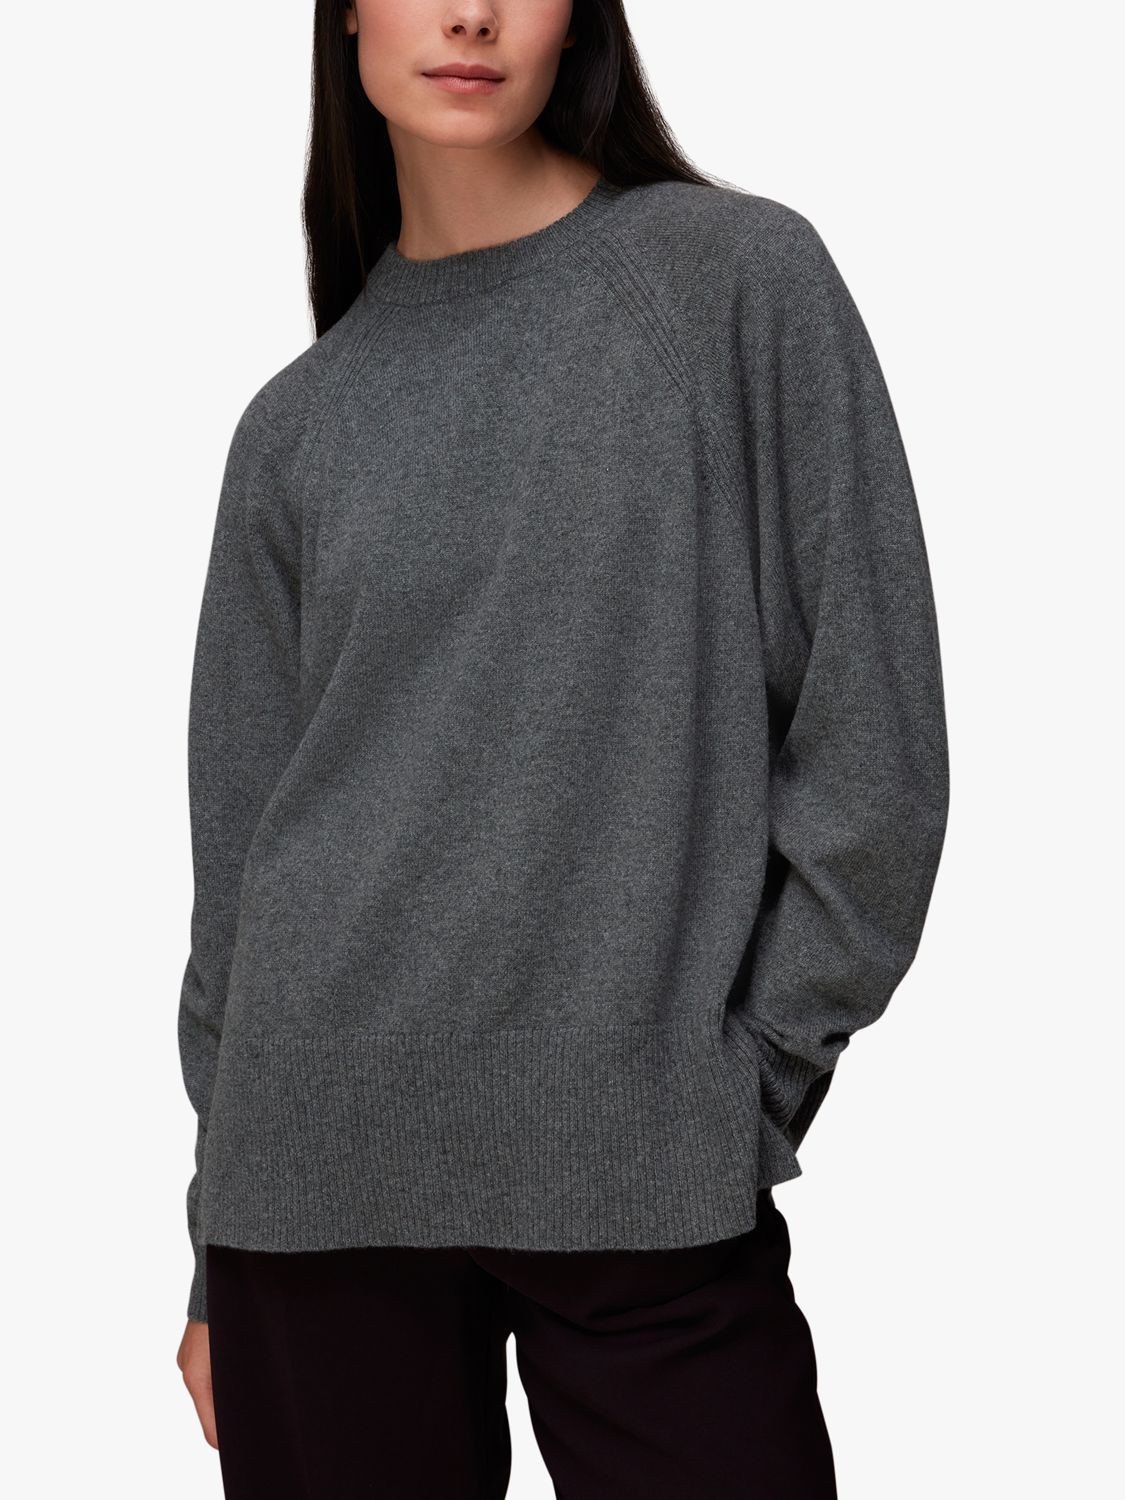 Whistles Ultimate Cashmere Jumper, Grey, XS